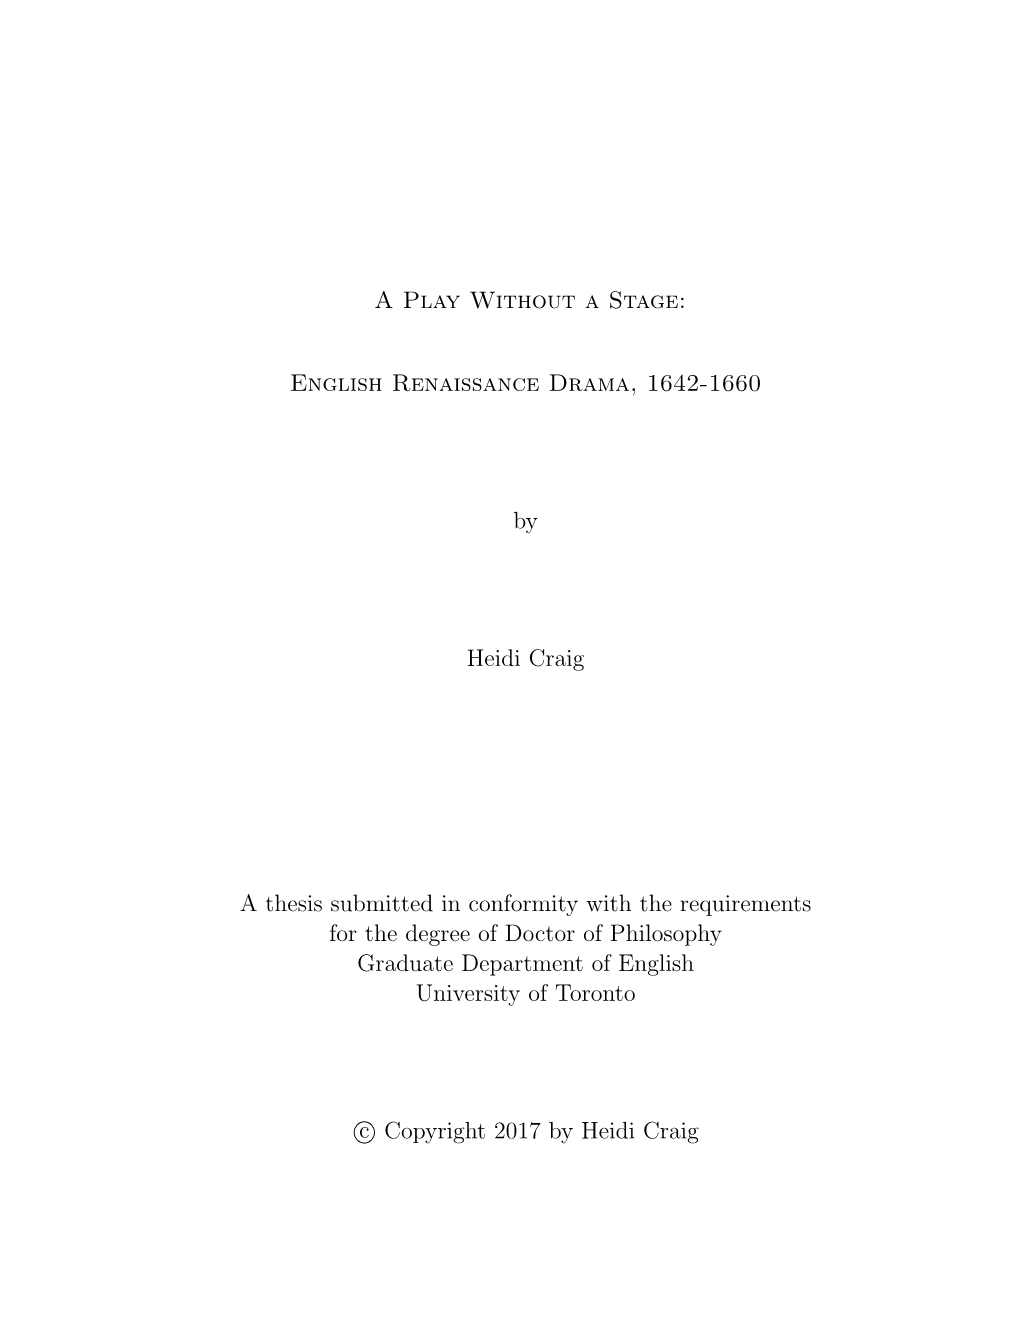 English Renaissance Drama, 1642-1660 by Heidi Craig a Thesis Submitted in Conformity with the Requiremen